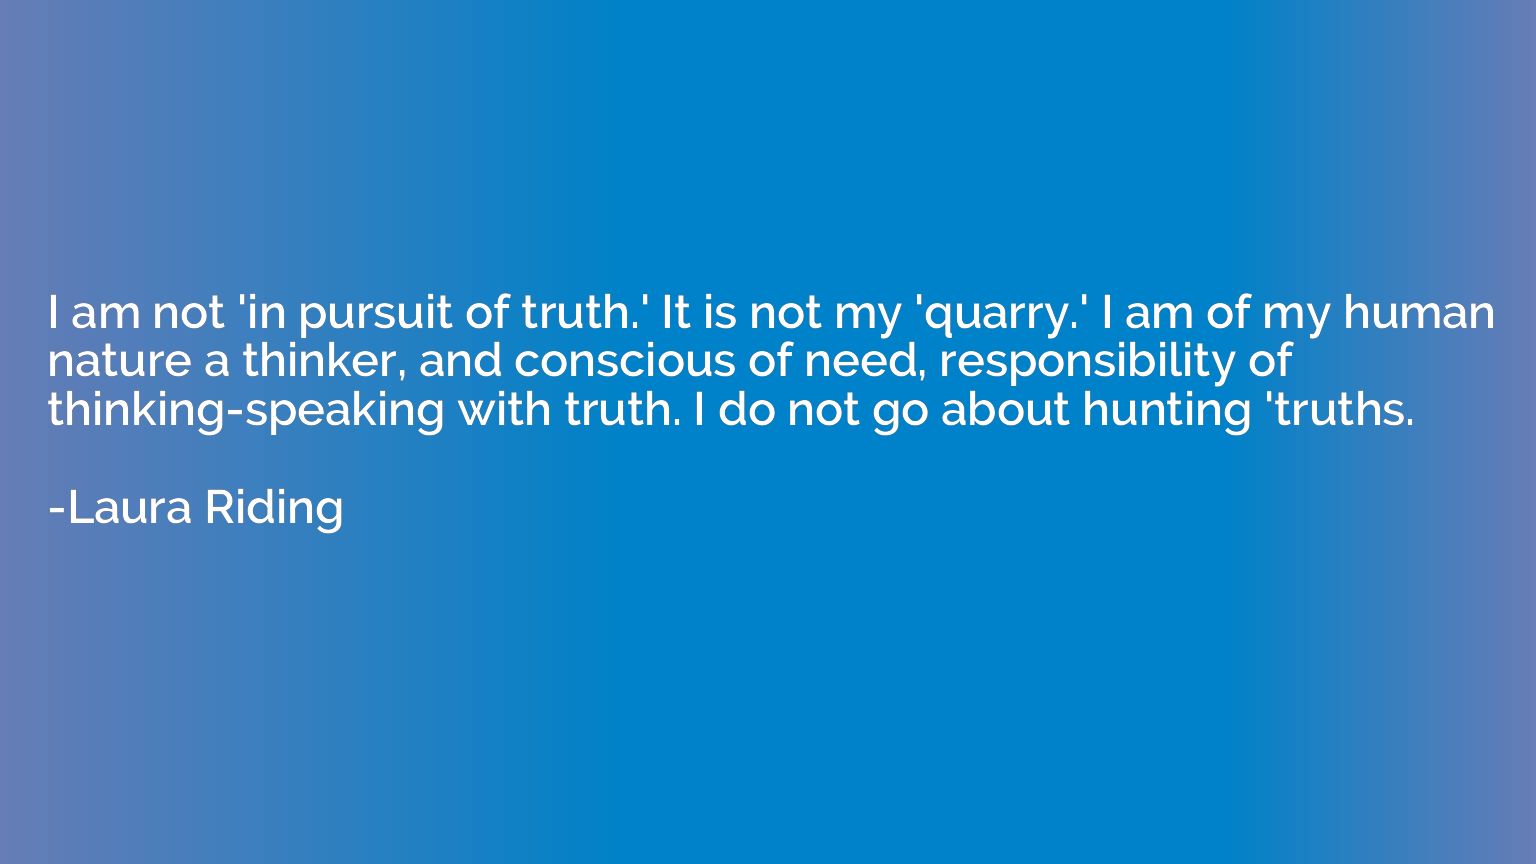 I am not 'in pursuit of truth.' It is not my 'quarry.' I am 